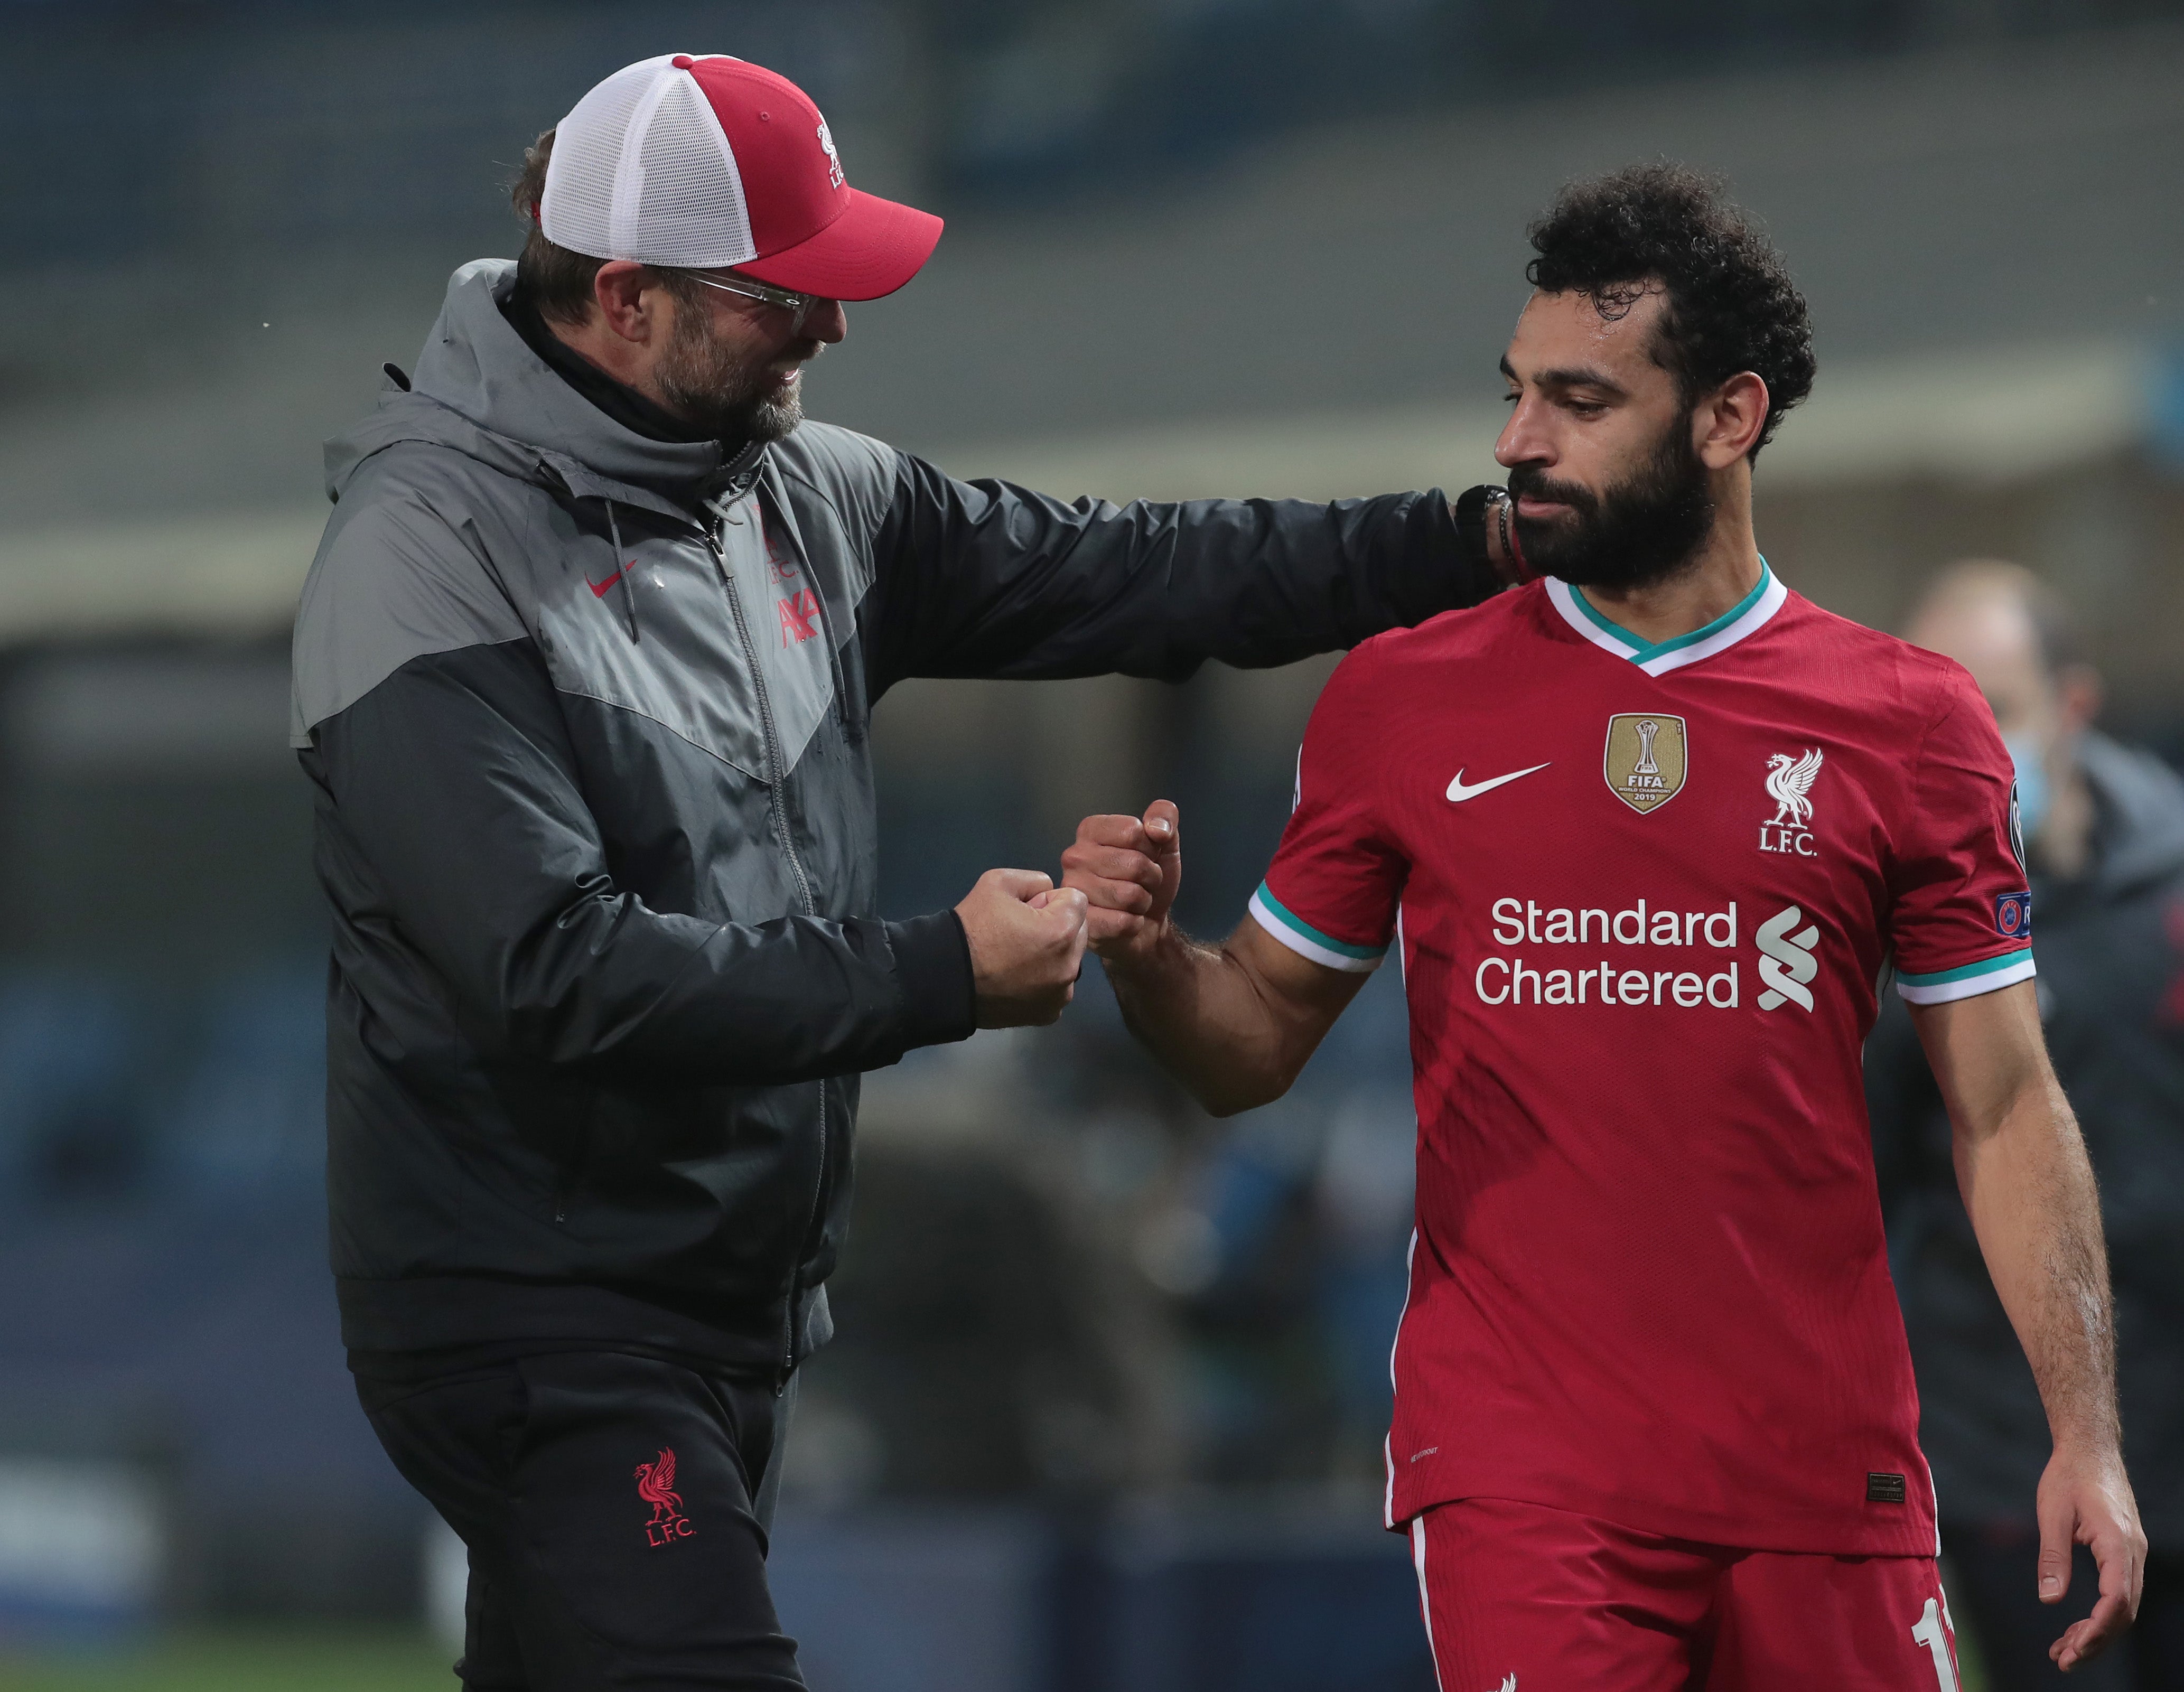 Salah was ranked seventh at the awards on Monday